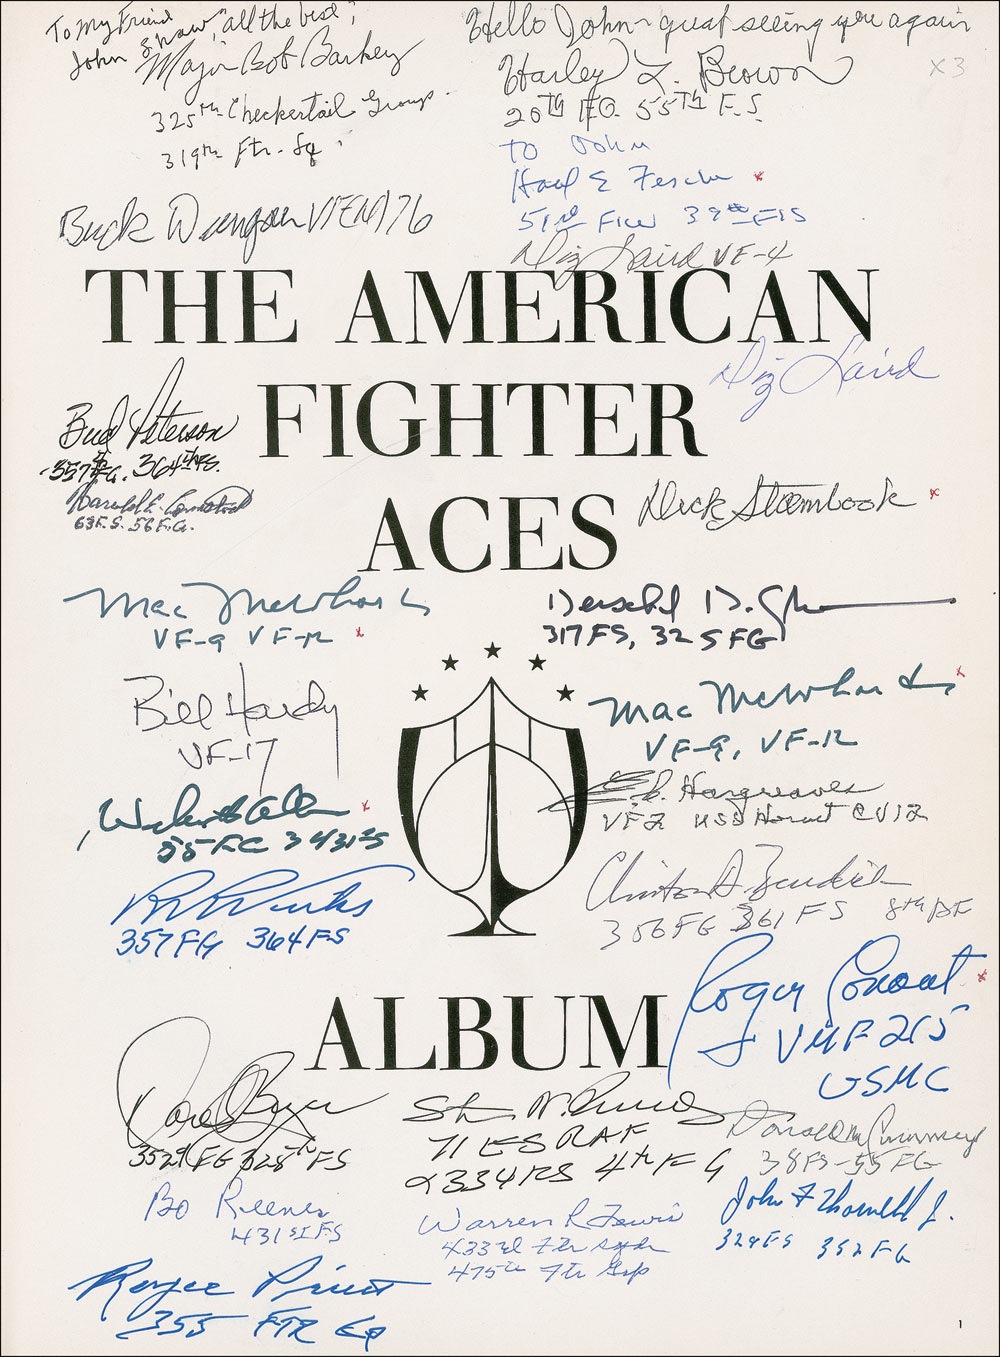 Lot #271 American Fighter Aces